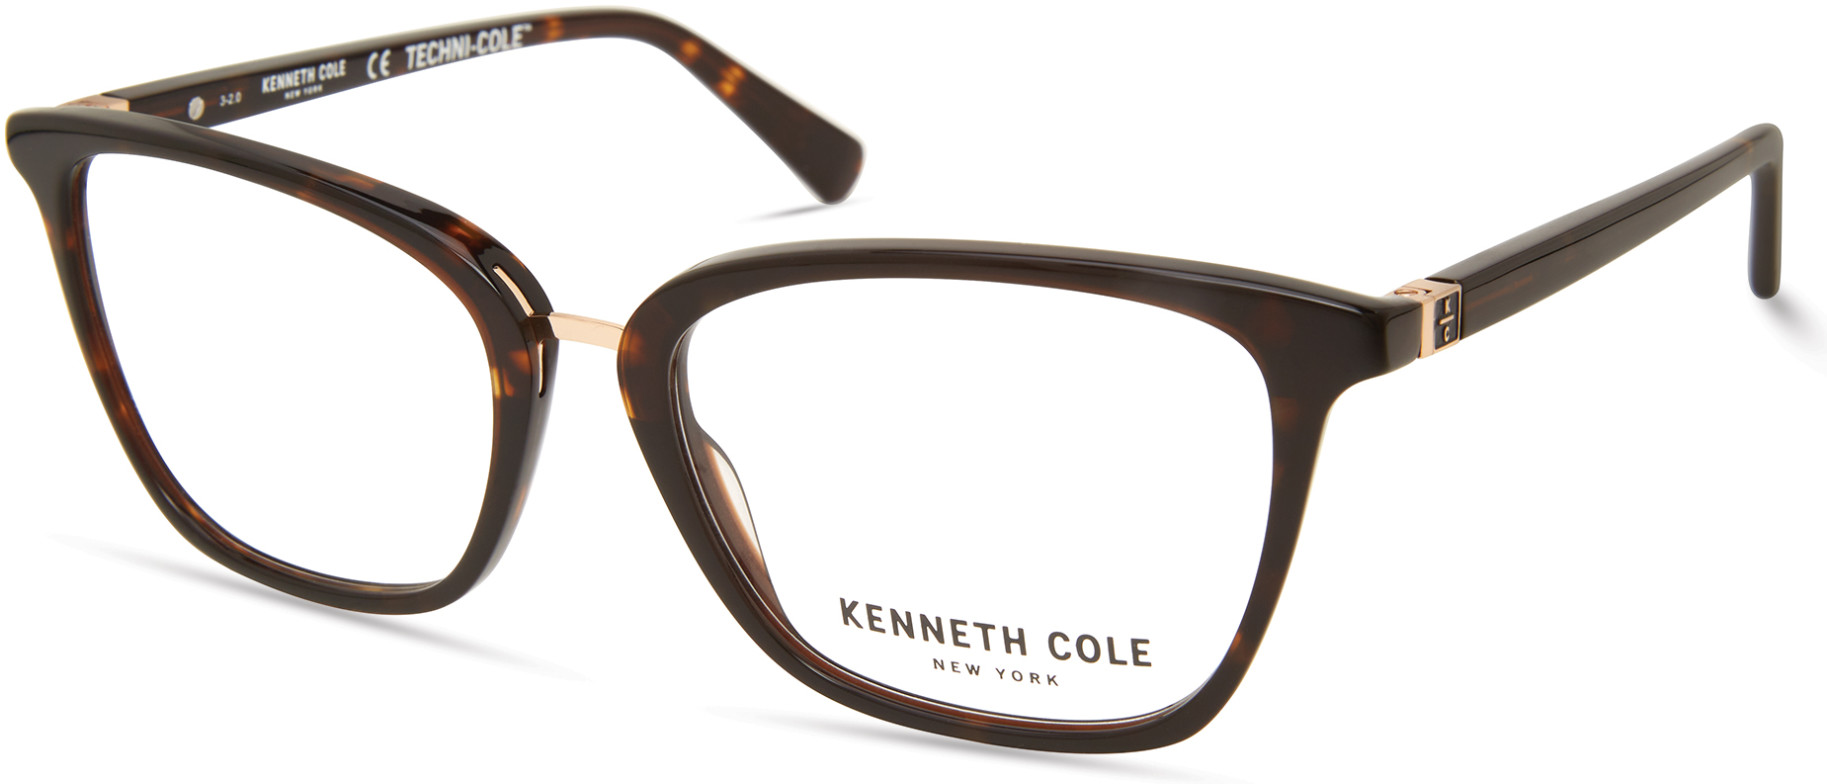 KENNETH COLE NY 0328 052